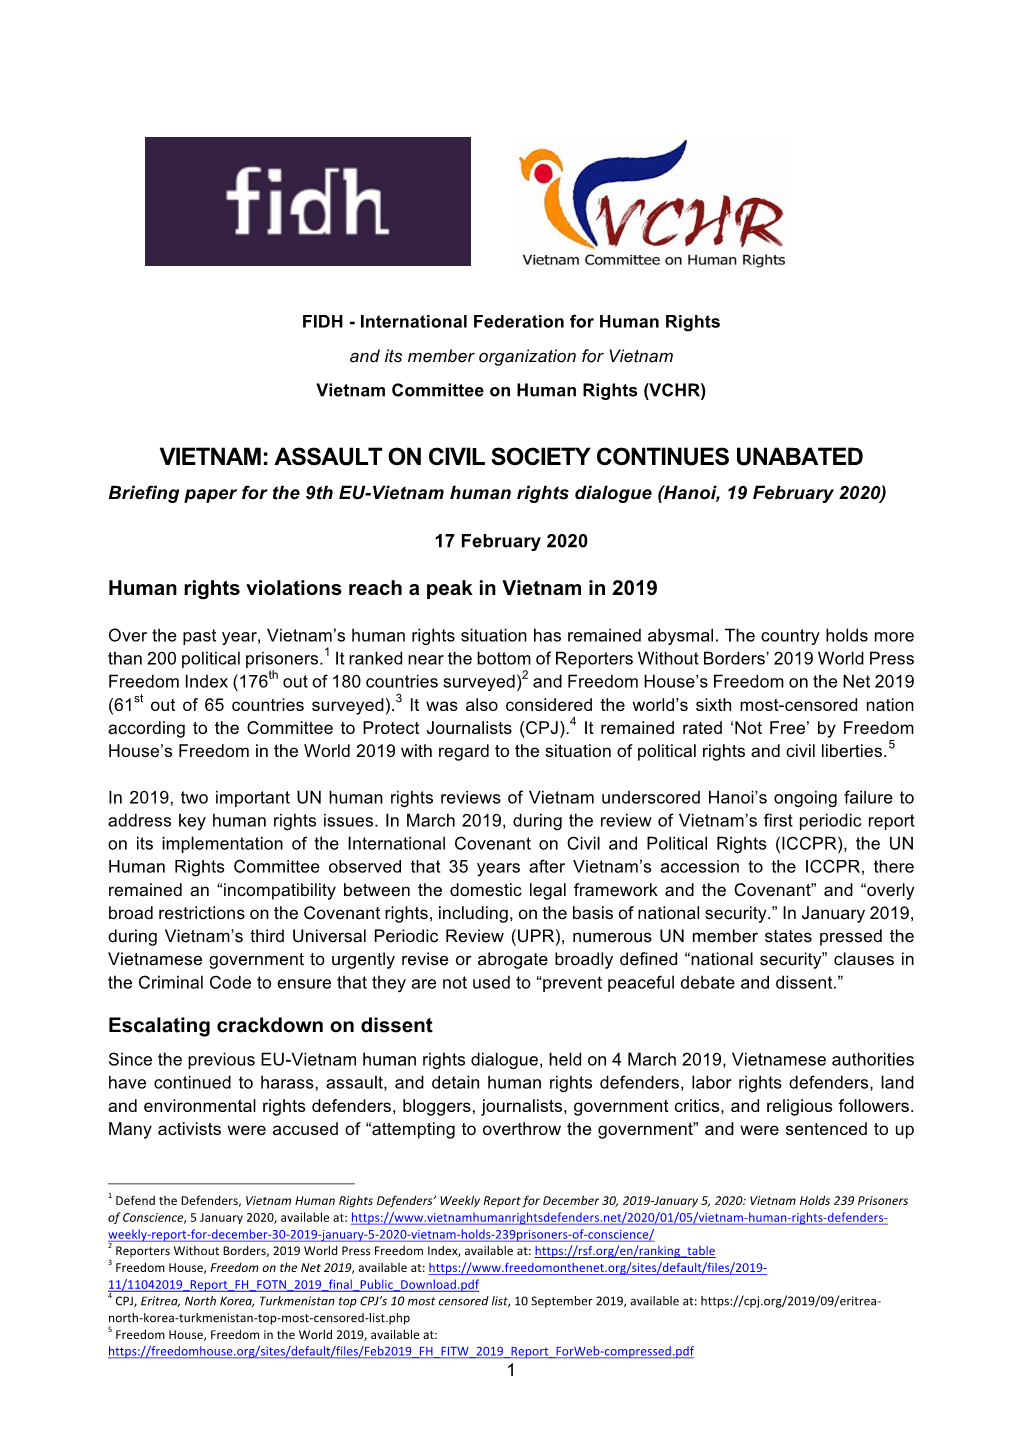 VIETNAM: ASSAULT on CIVIL SOCIETY CONTINUES UNABATED Briefing Paper for the 9Th EU-Vietnam Human Rights Dialogue (Hanoi, 19 February 2020)